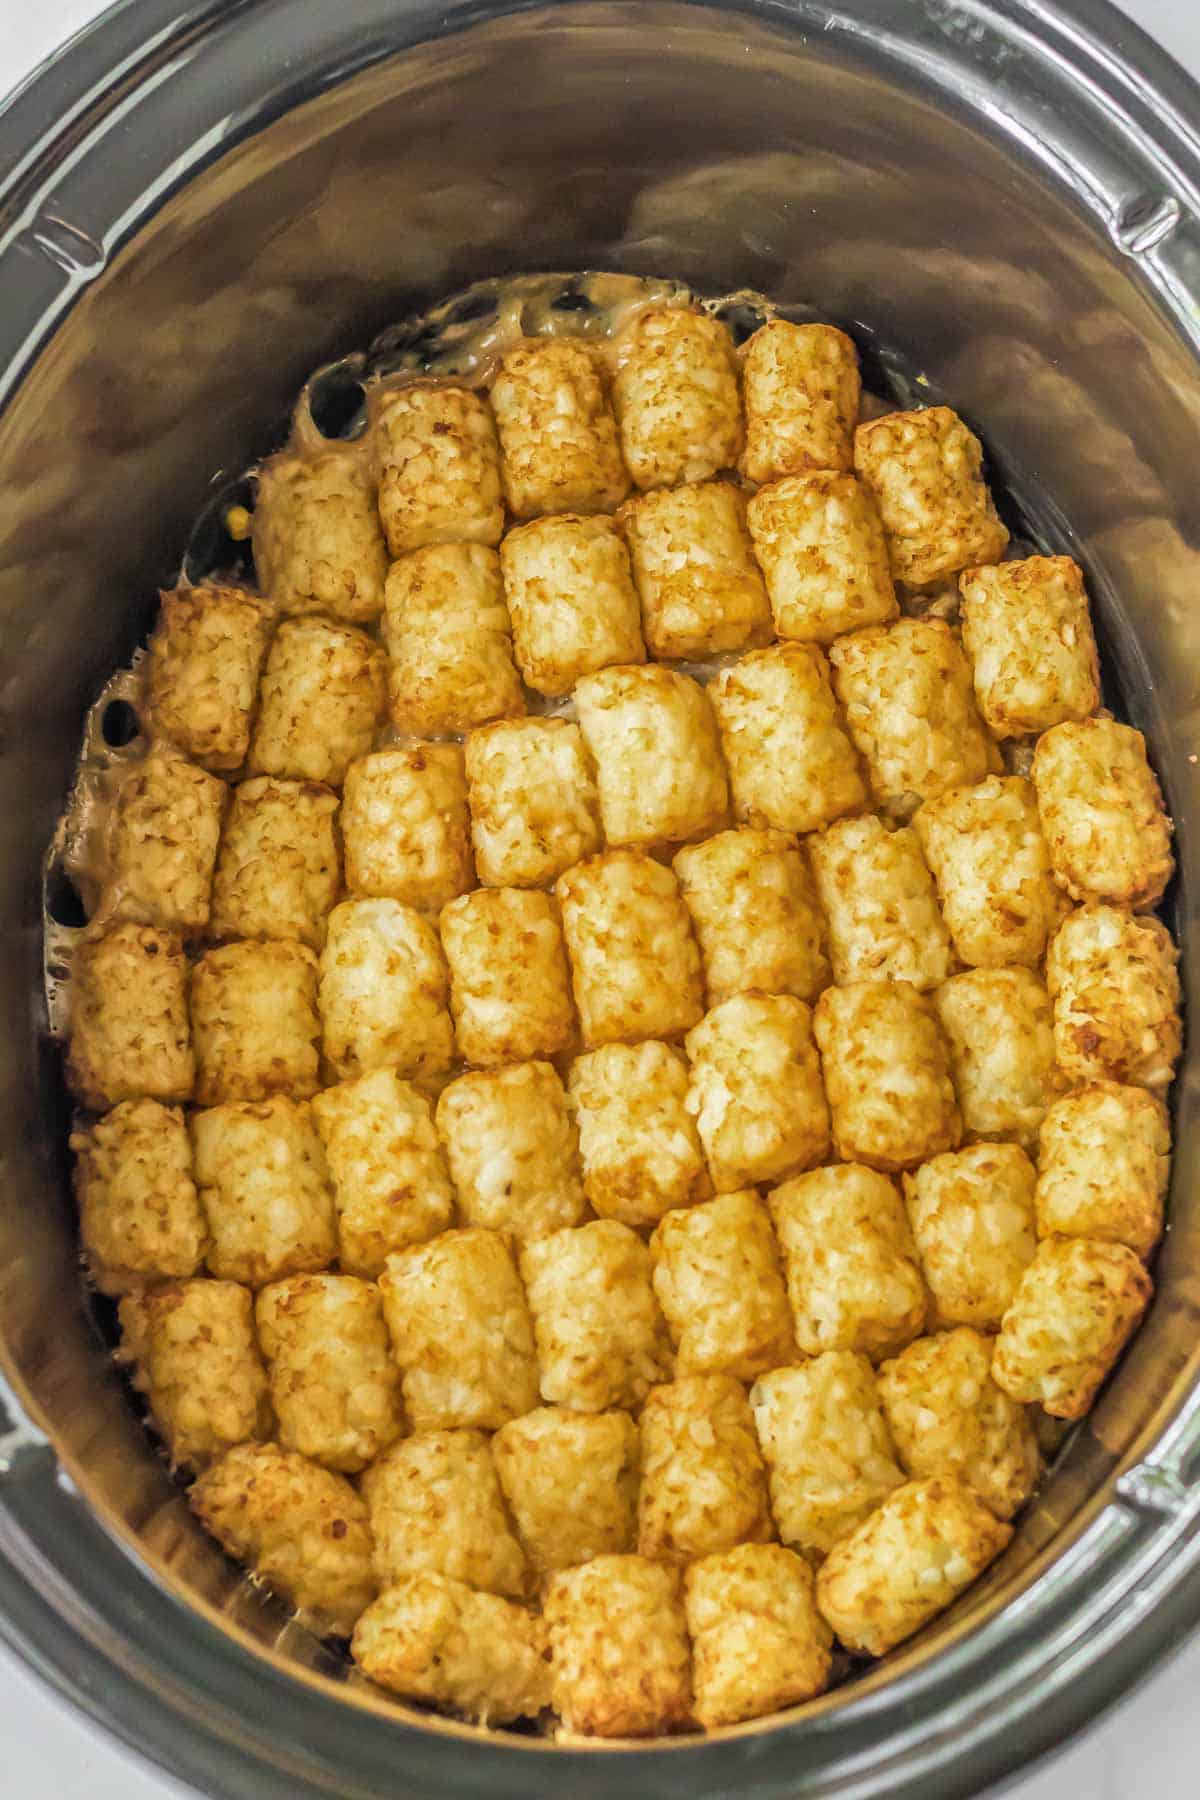 tater tots in a single layer in a black slow cooker.